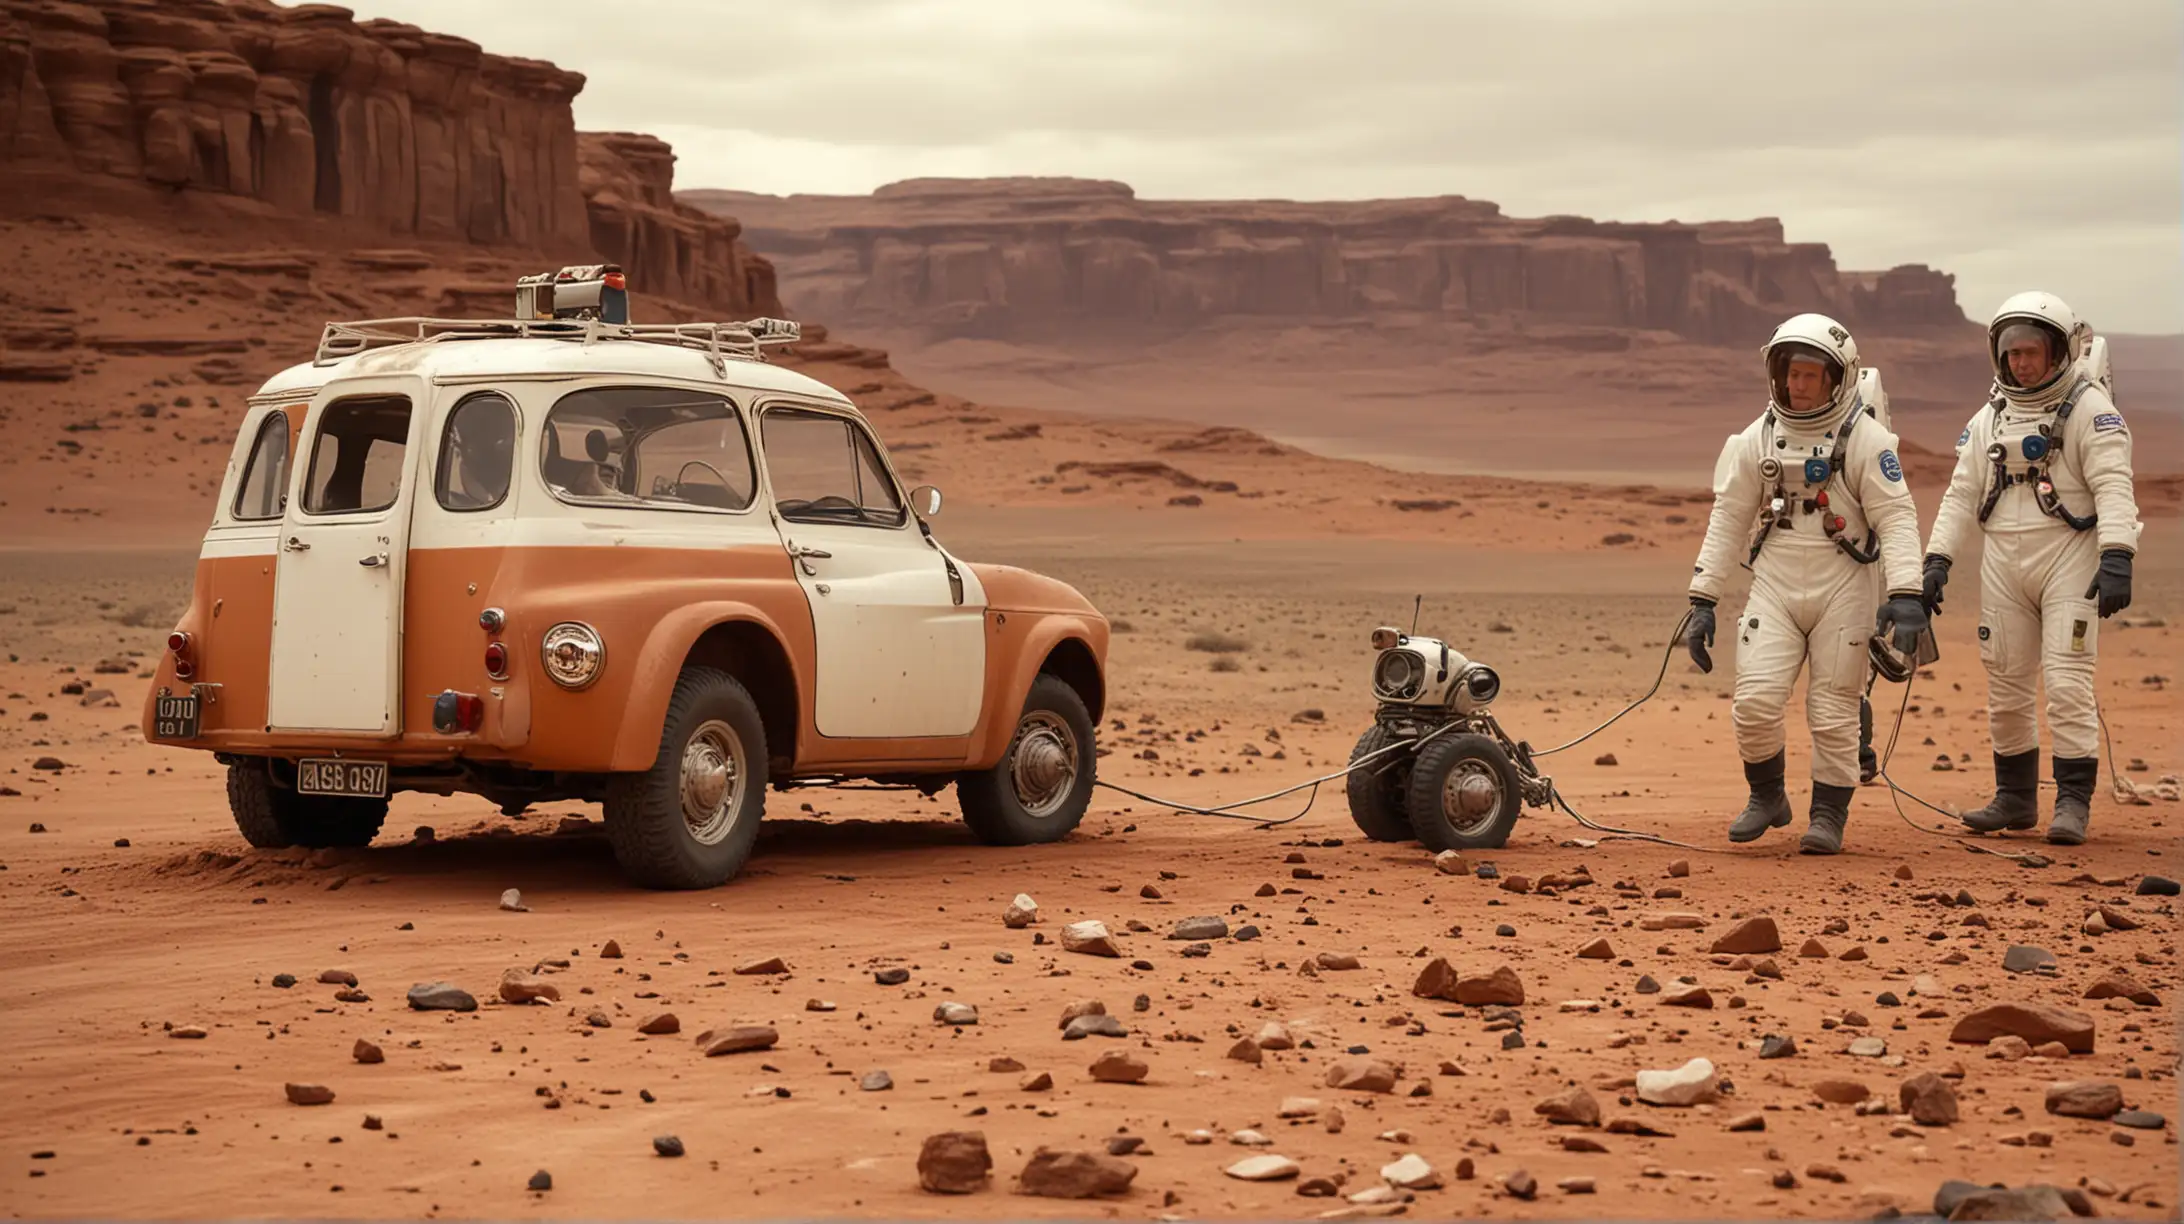 Mars Exploration Astronauts Towing Vintage Ford Anglia and Lander